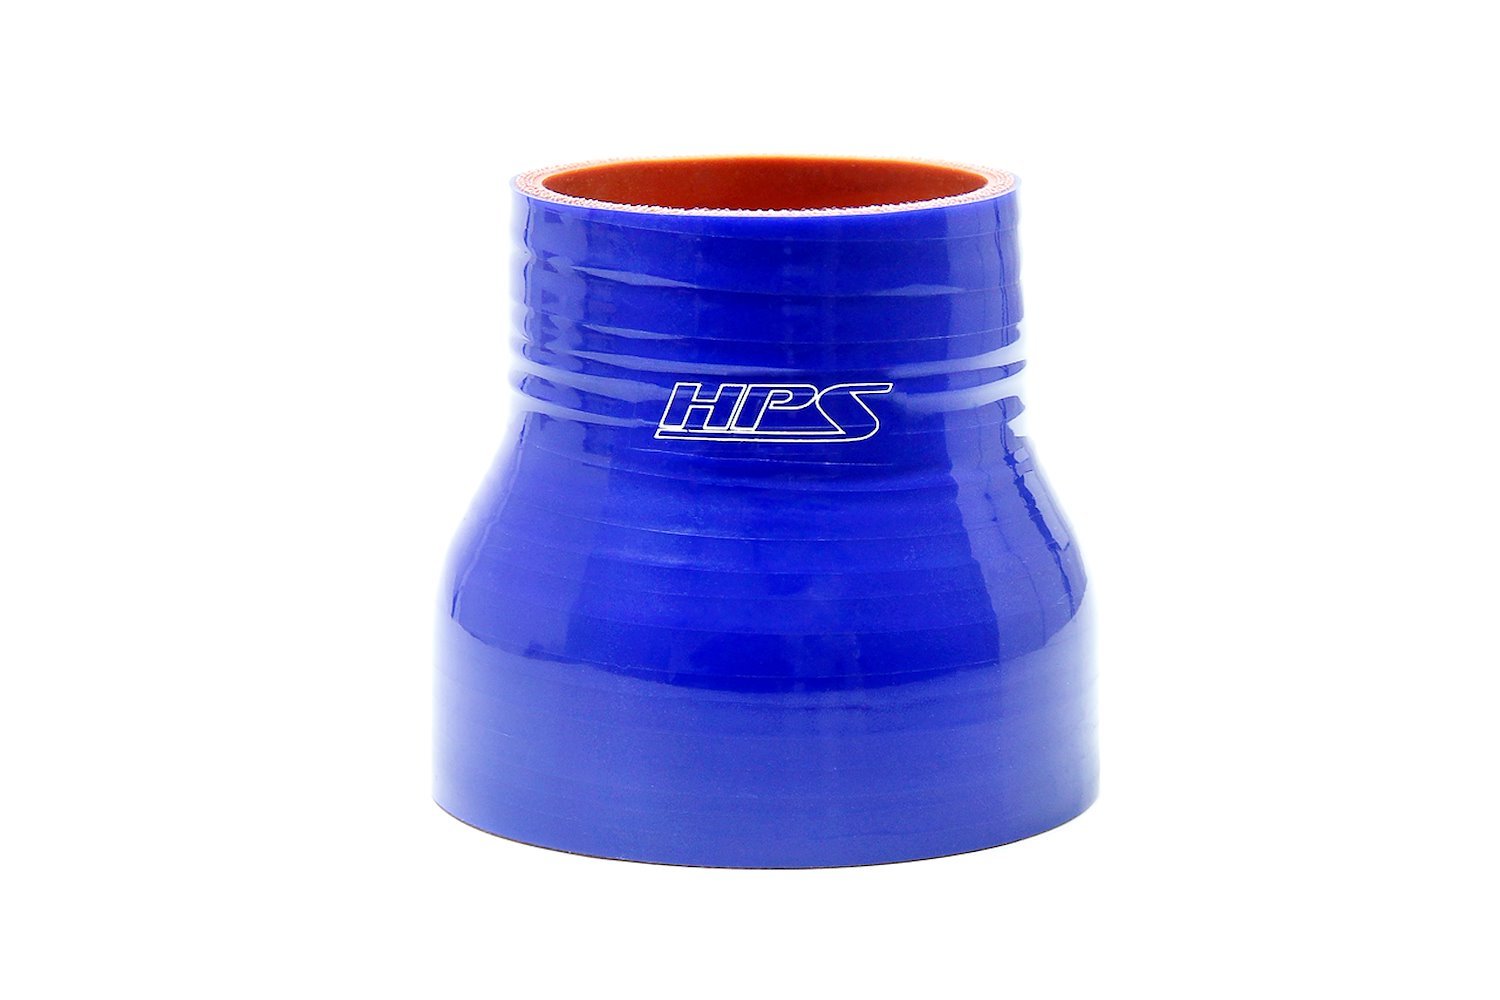 HTSR-312-350-BLUE Silicone Reducer Hose, High-Temp 4-Ply Reinforced, 3-1/8 in. - 3-1/2 in. ID, 3 in. Long, Blue